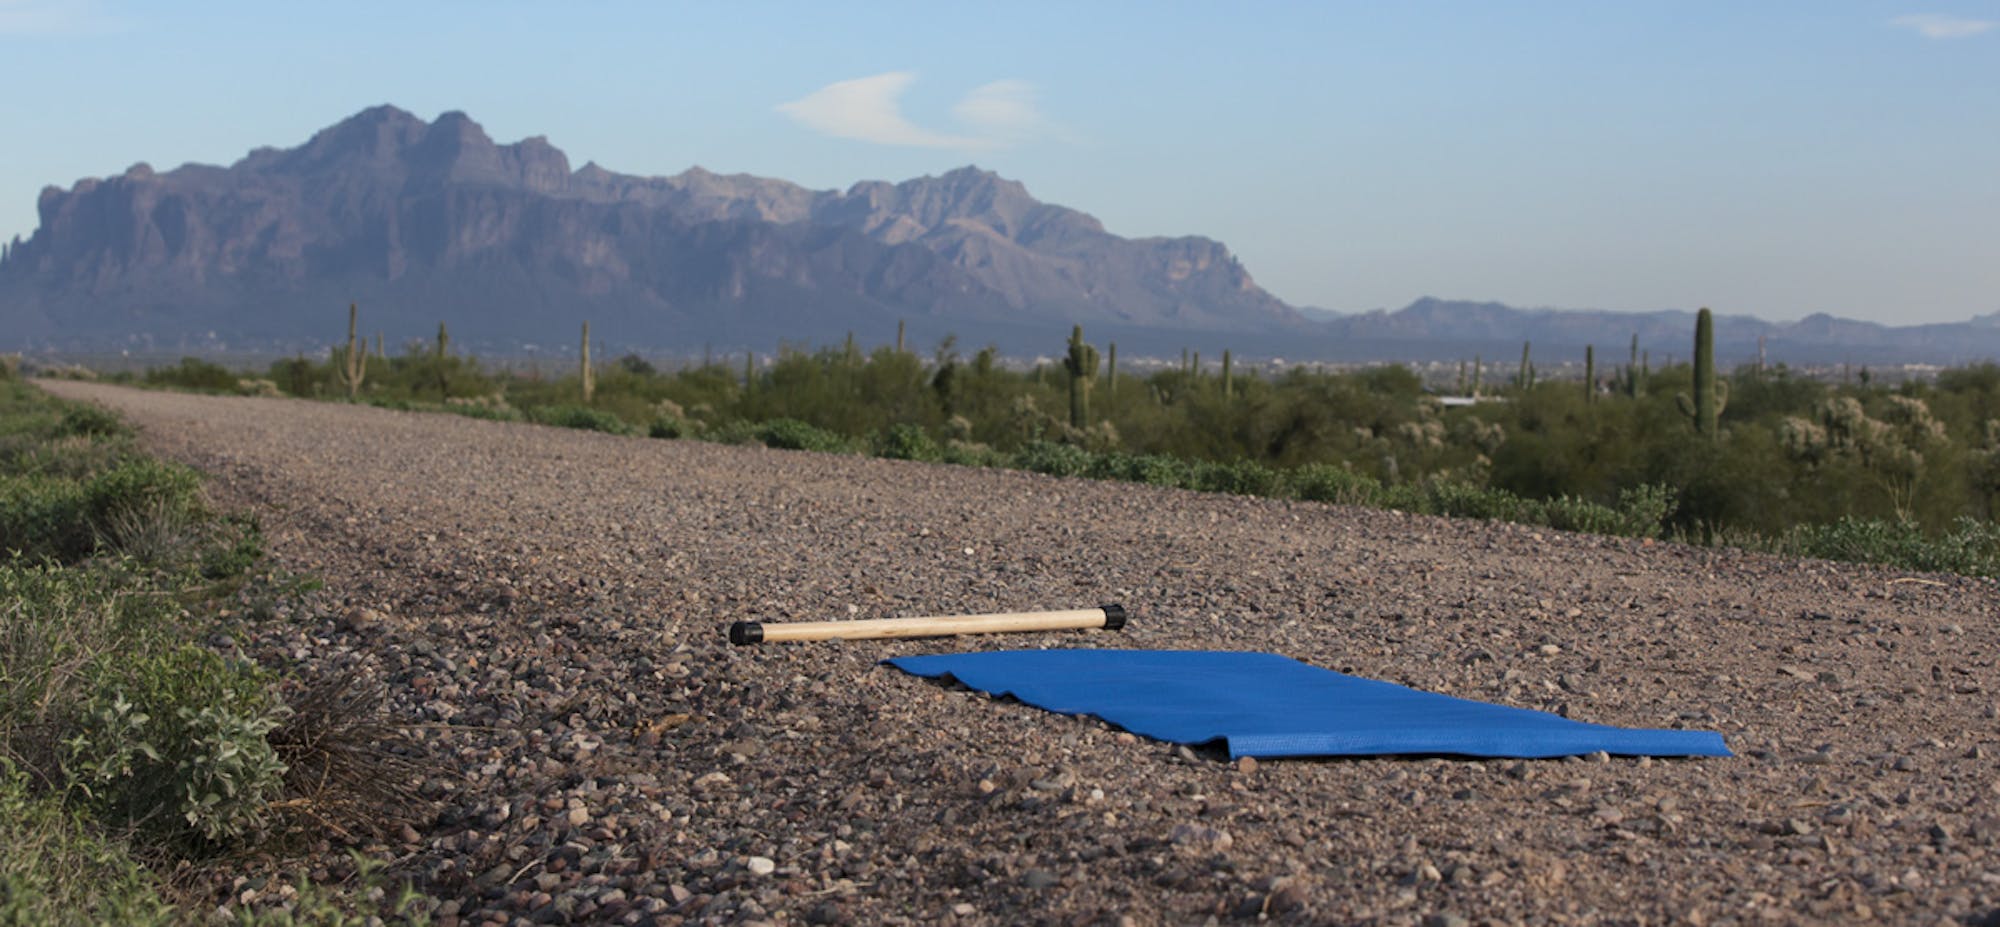 Pilates mat in front of mountains